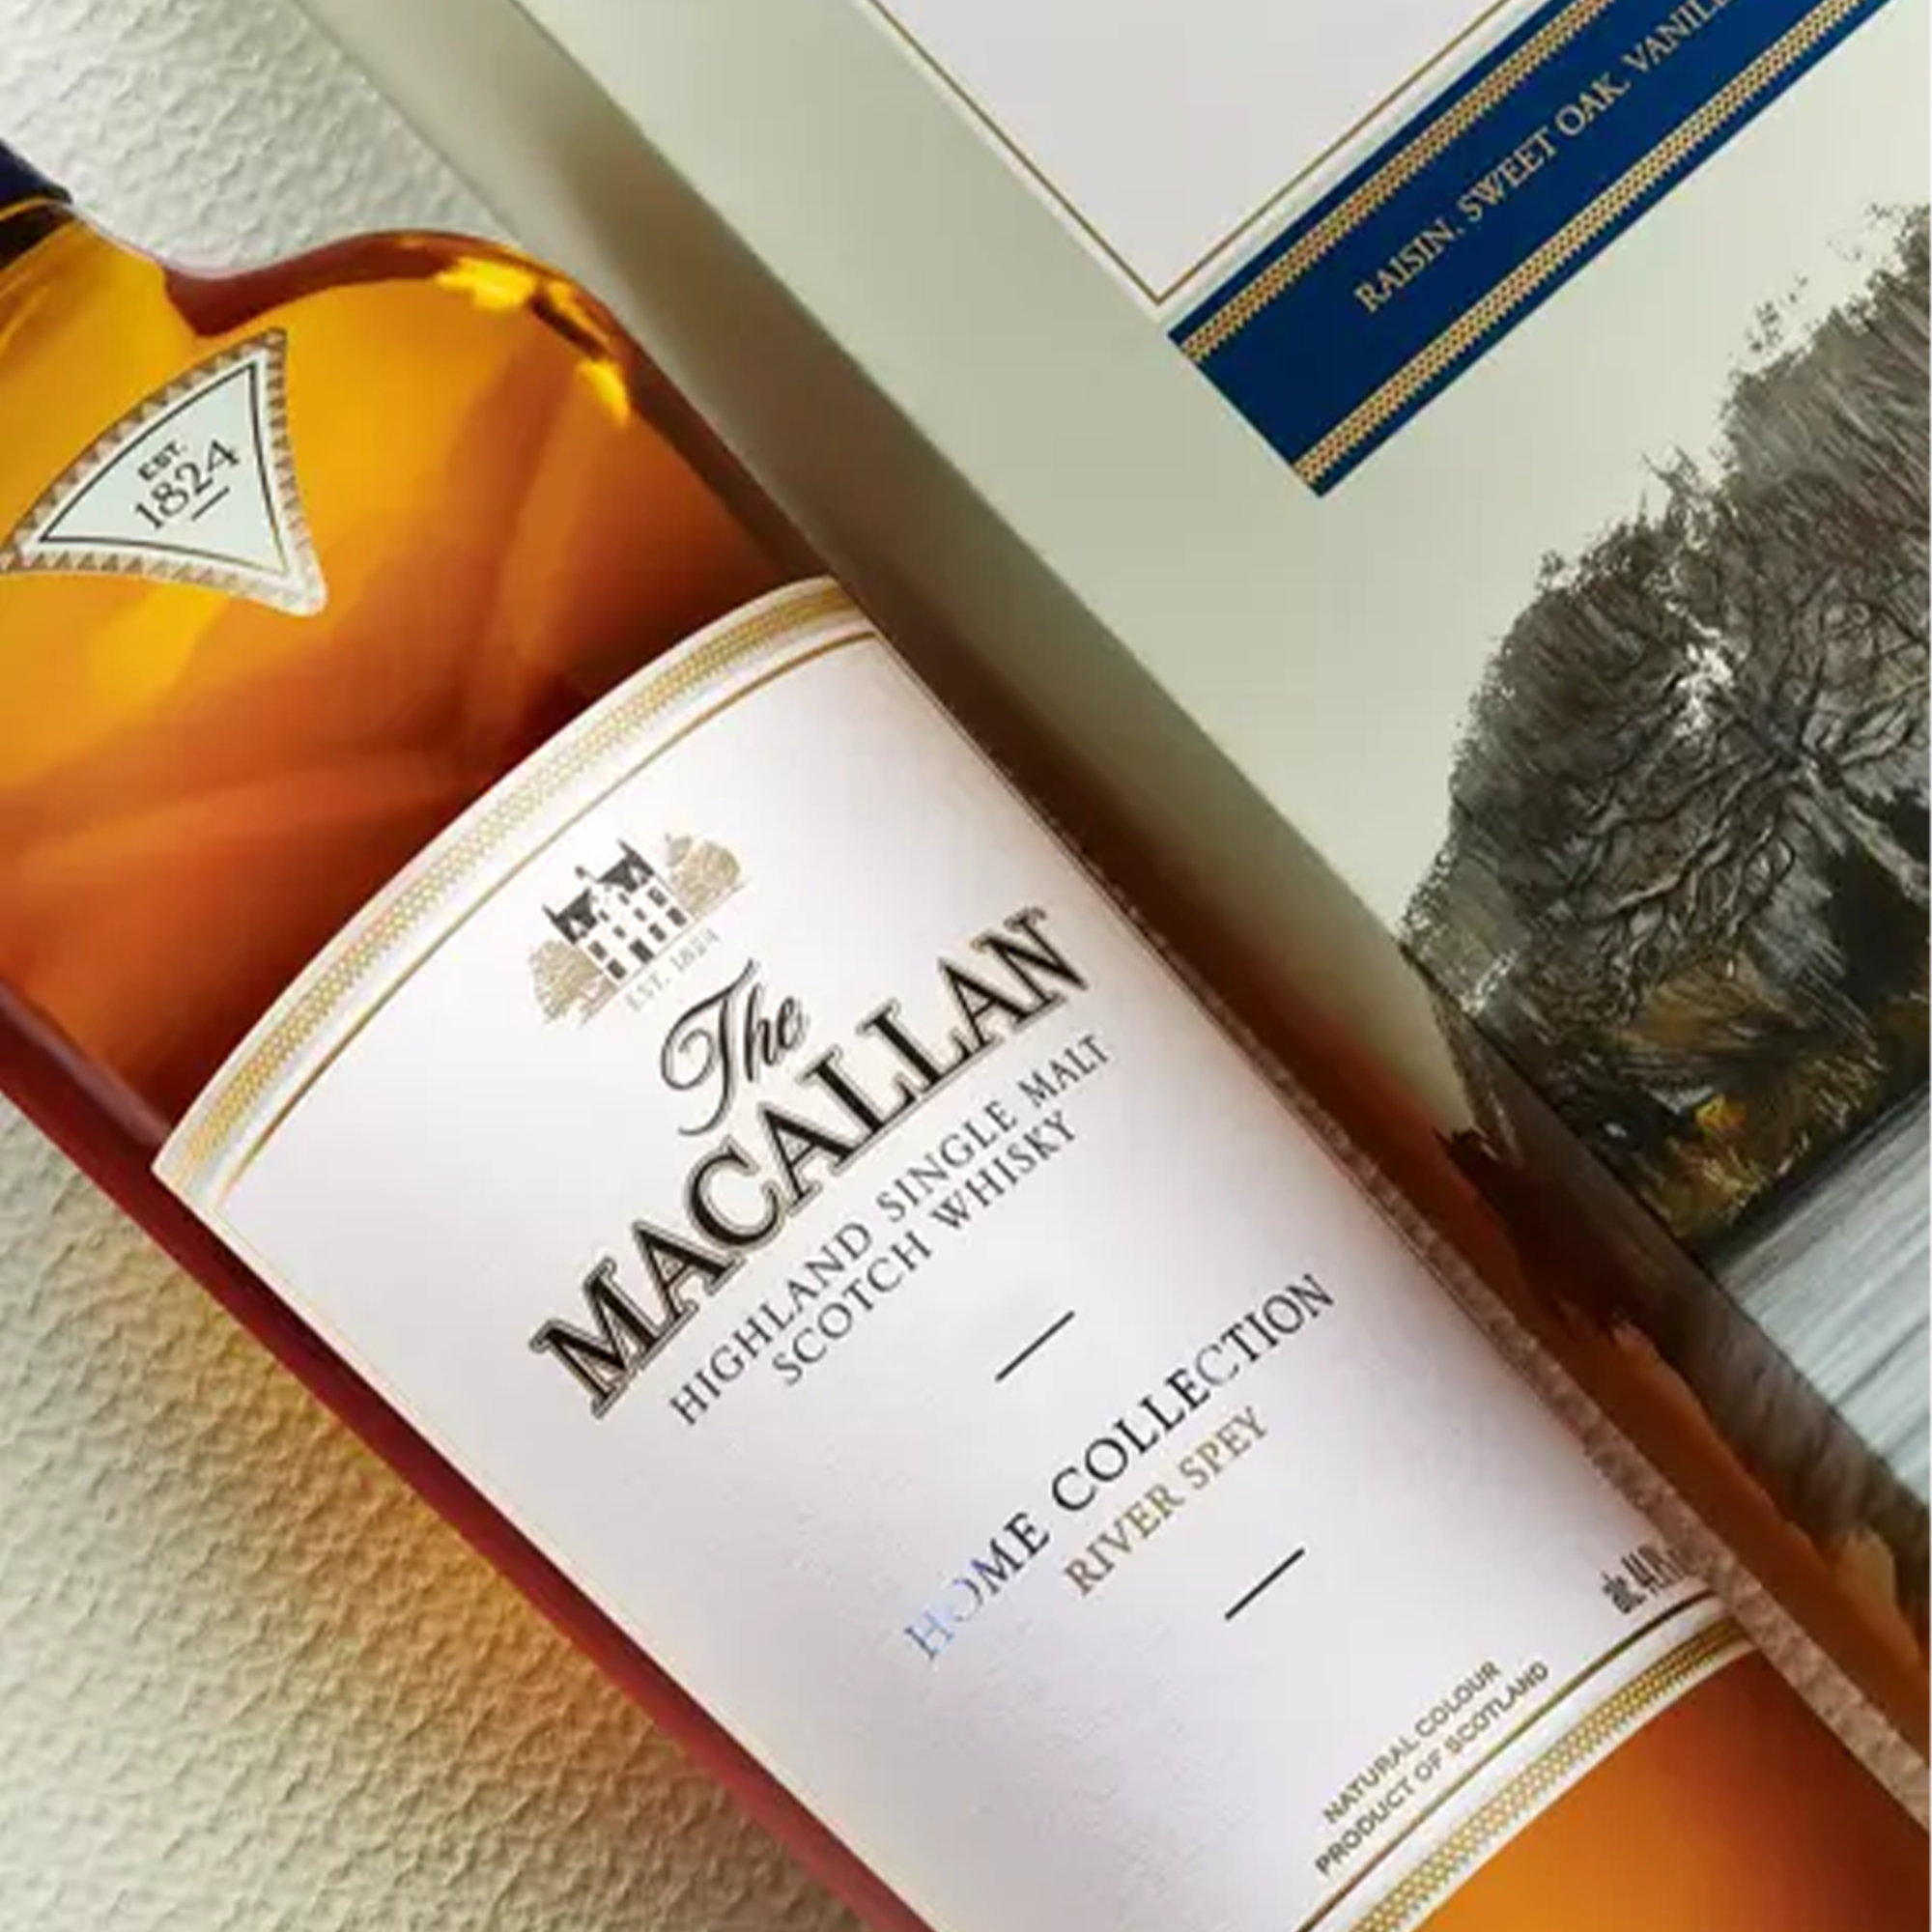 Macallan Home Collection River Spey Single Malt Scotch Whisky